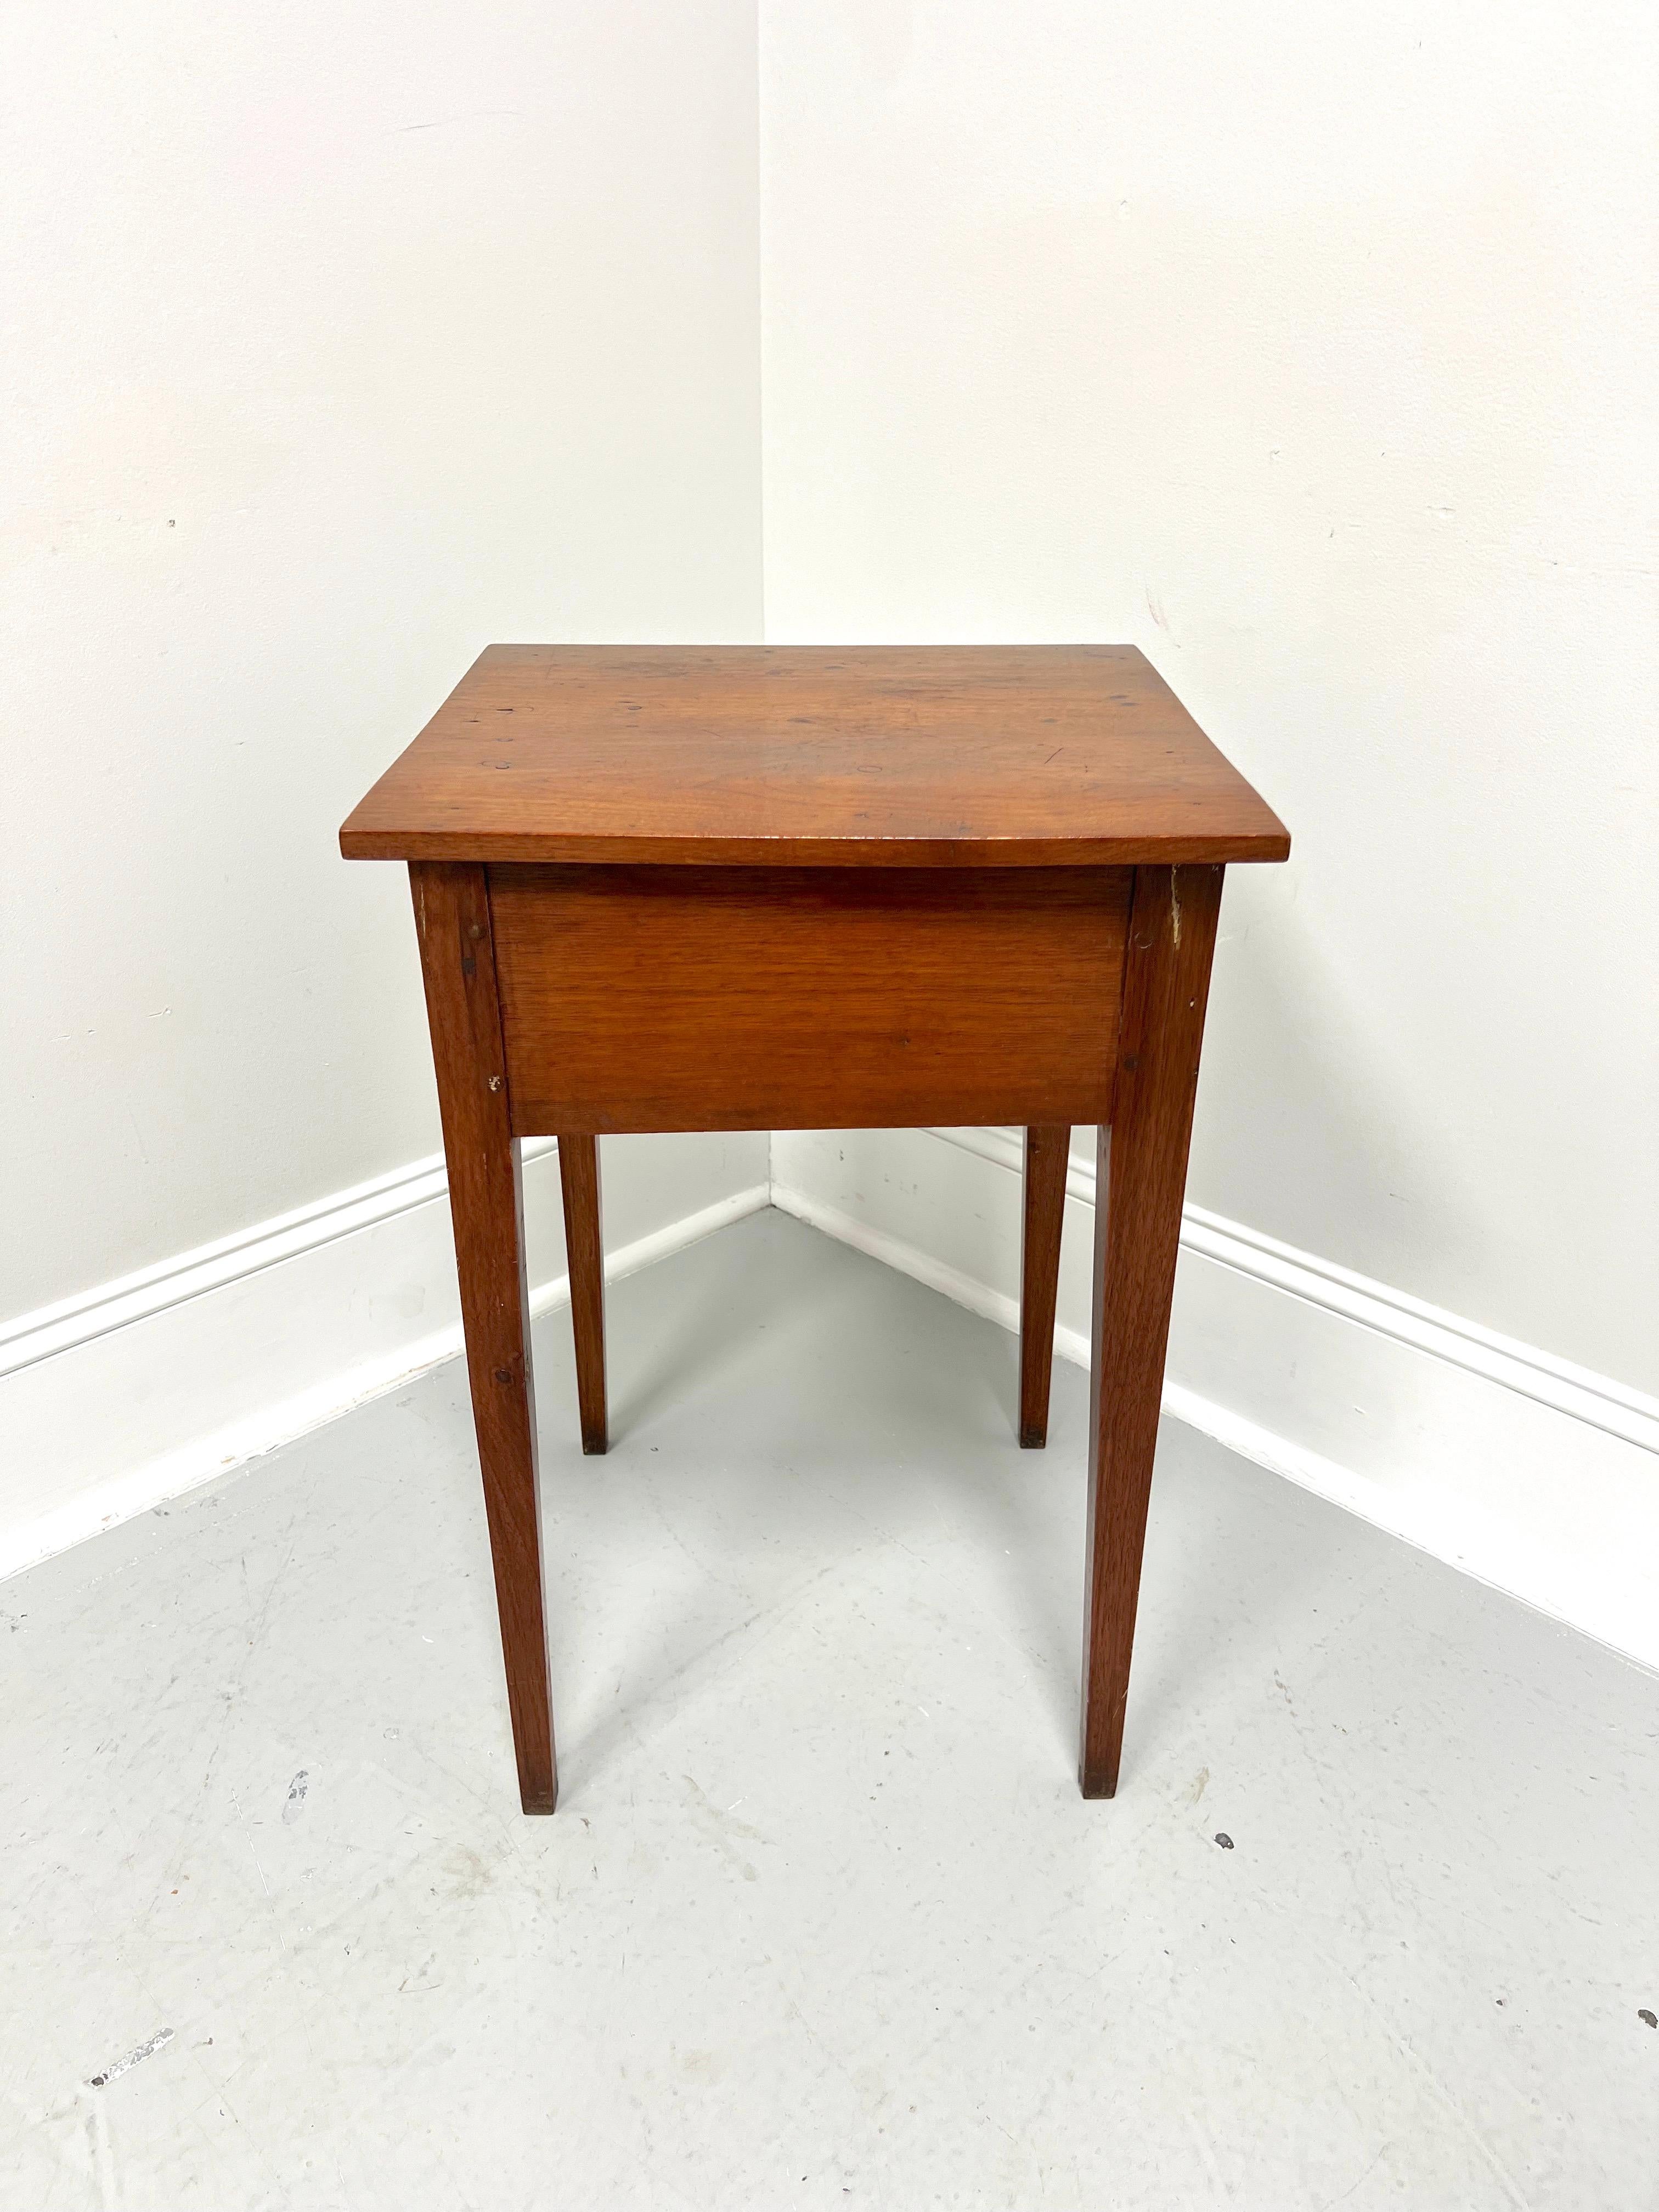 American Antique 19th Century Walnut Single Drawer Side Table with Tapered Legs